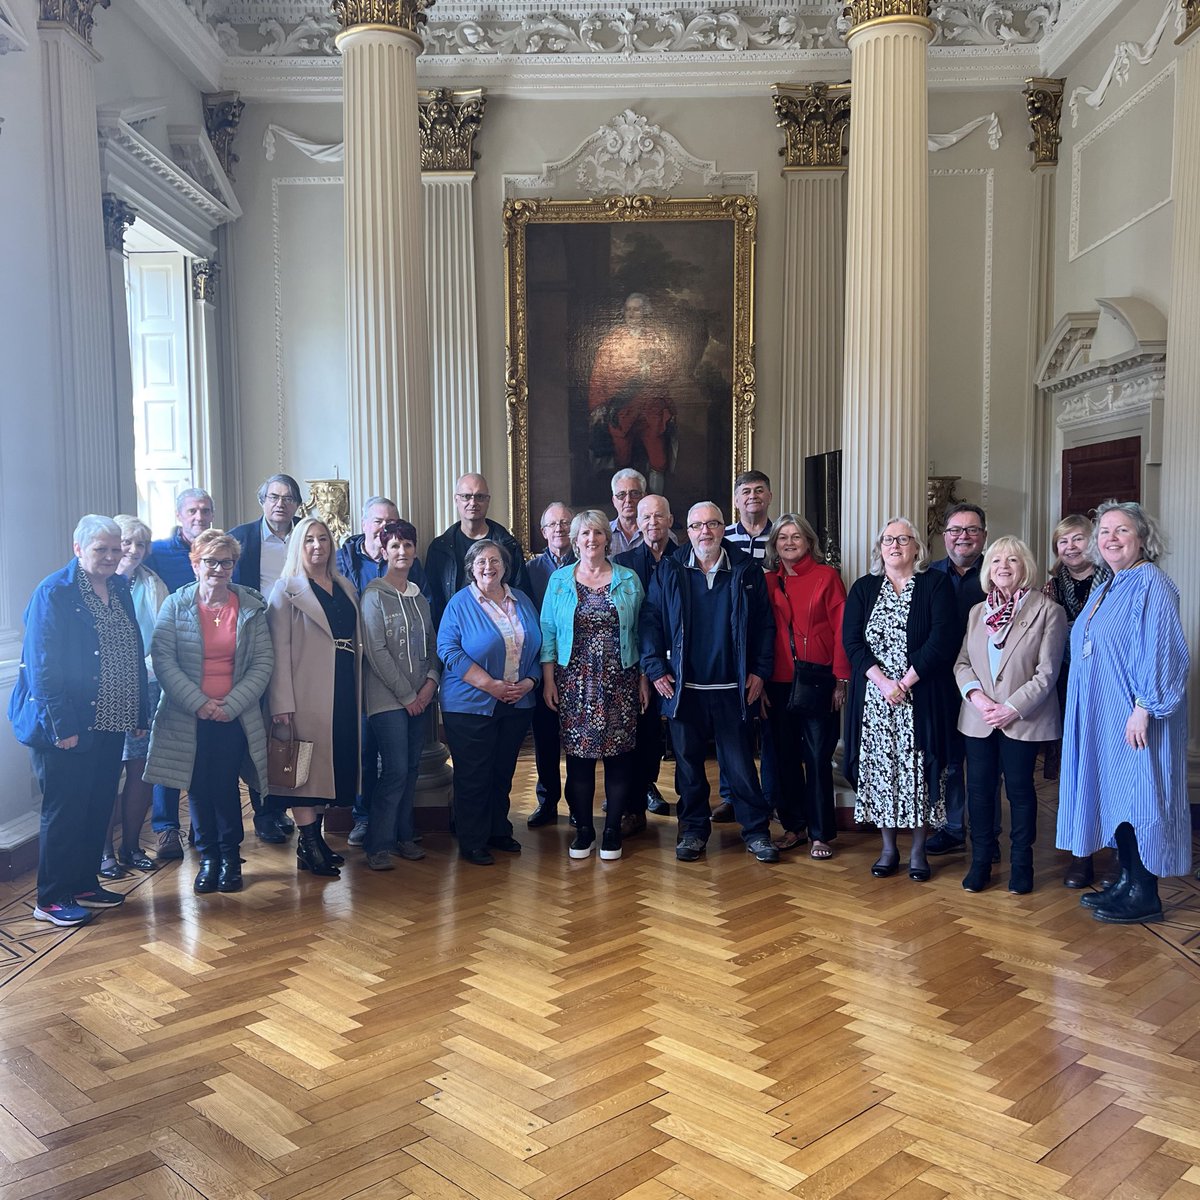 It was wonderful to meet with retiring staff who have dedicated themselves to Trinity in so many different ways. In particular, it was lovely to meet Martyn Linnie (@TCD_NatSci) who has worked in Trinity for 55 years!